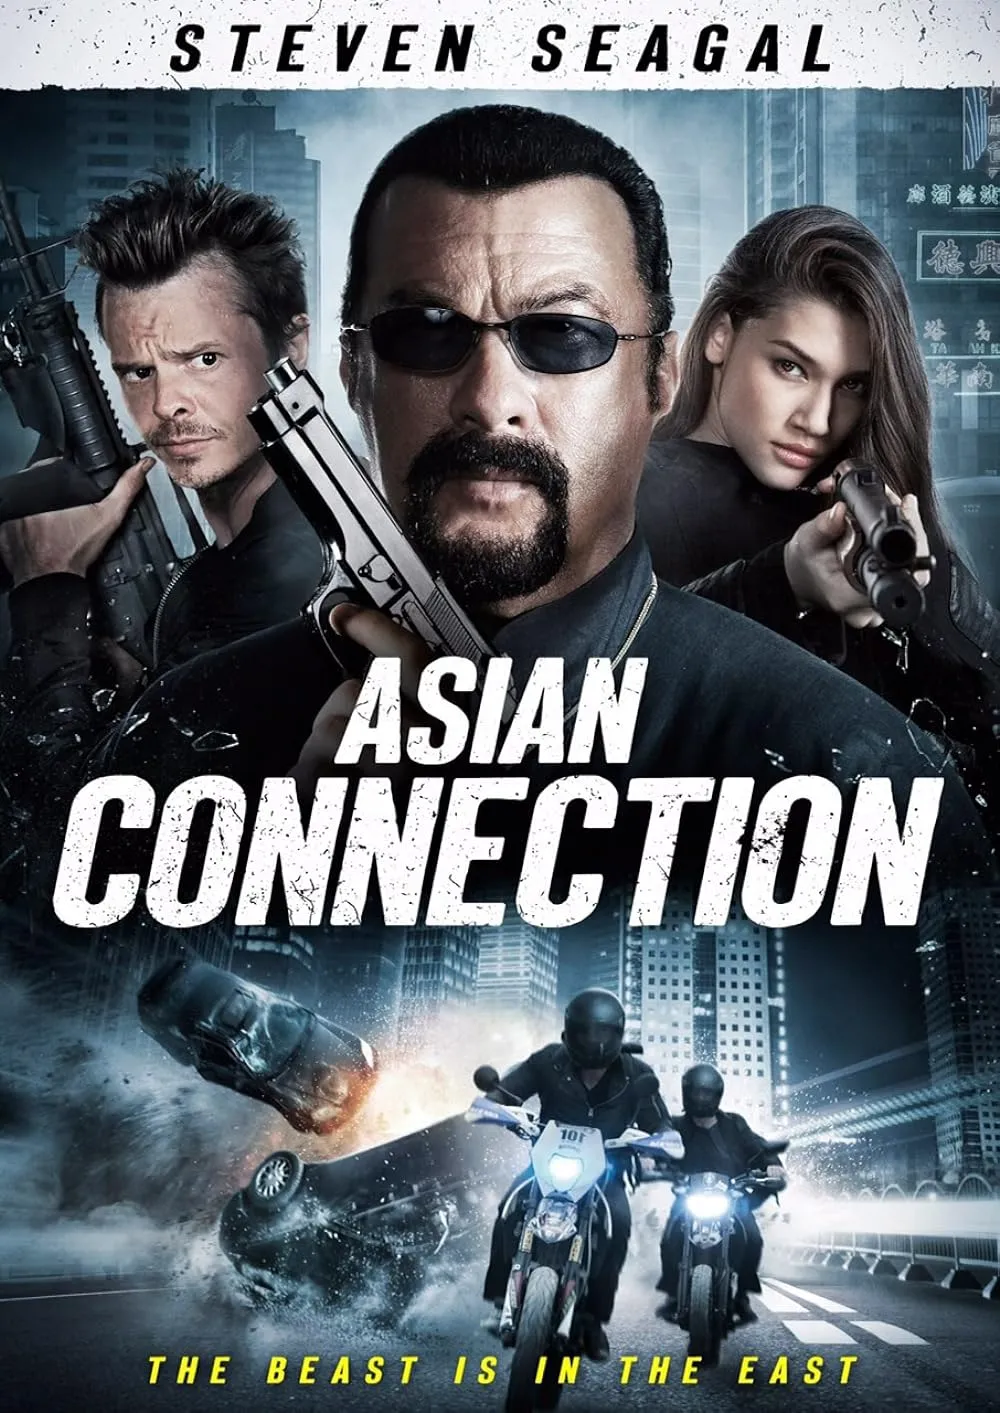 The Asian Connection 2016 Hindi ORG Dual Audio 1080p BluRay ESub 1.6GB Download